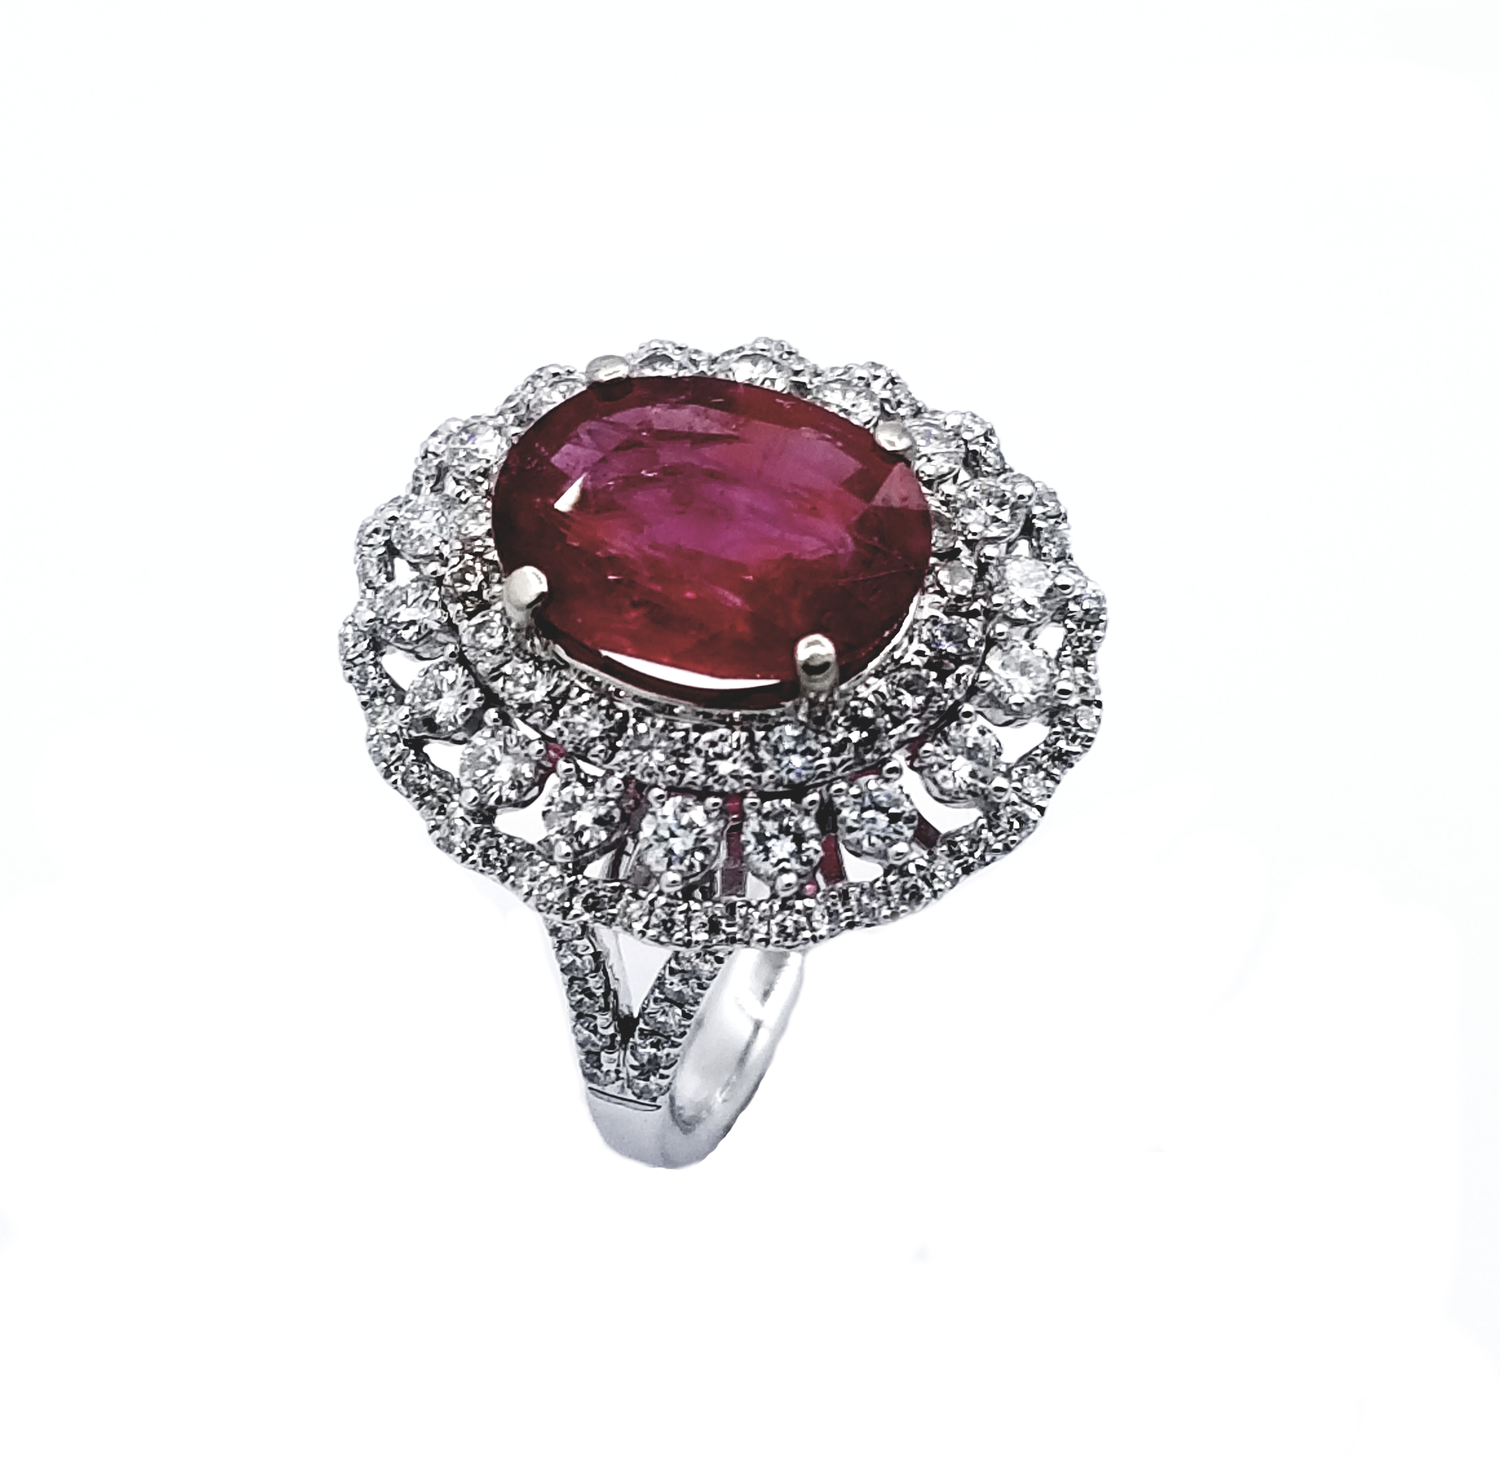 Ruby and diamond ring in 18K white gold